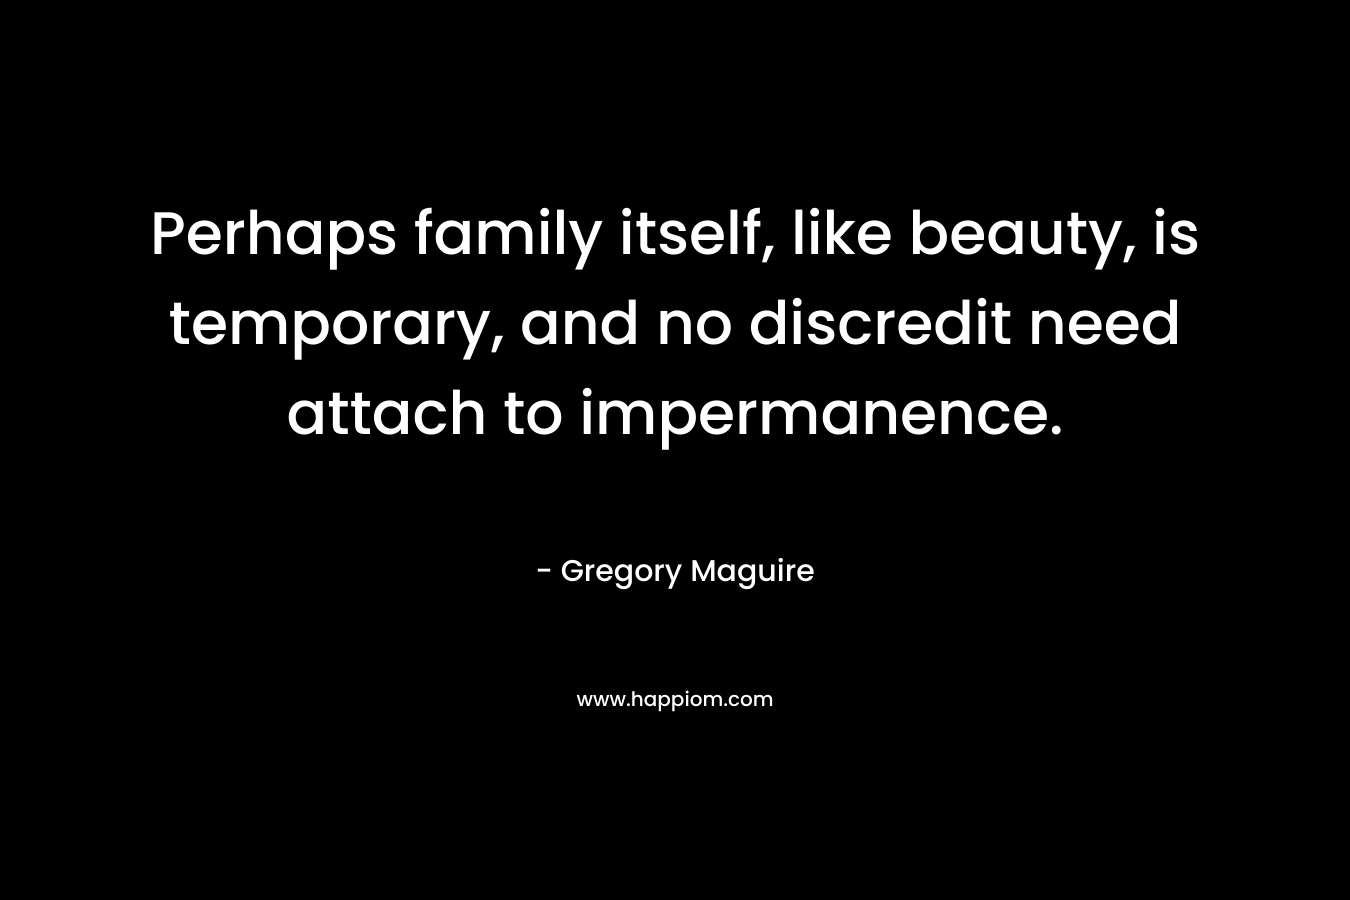 Perhaps family itself, like beauty, is temporary, and no discredit need attach to impermanence. – Gregory Maguire